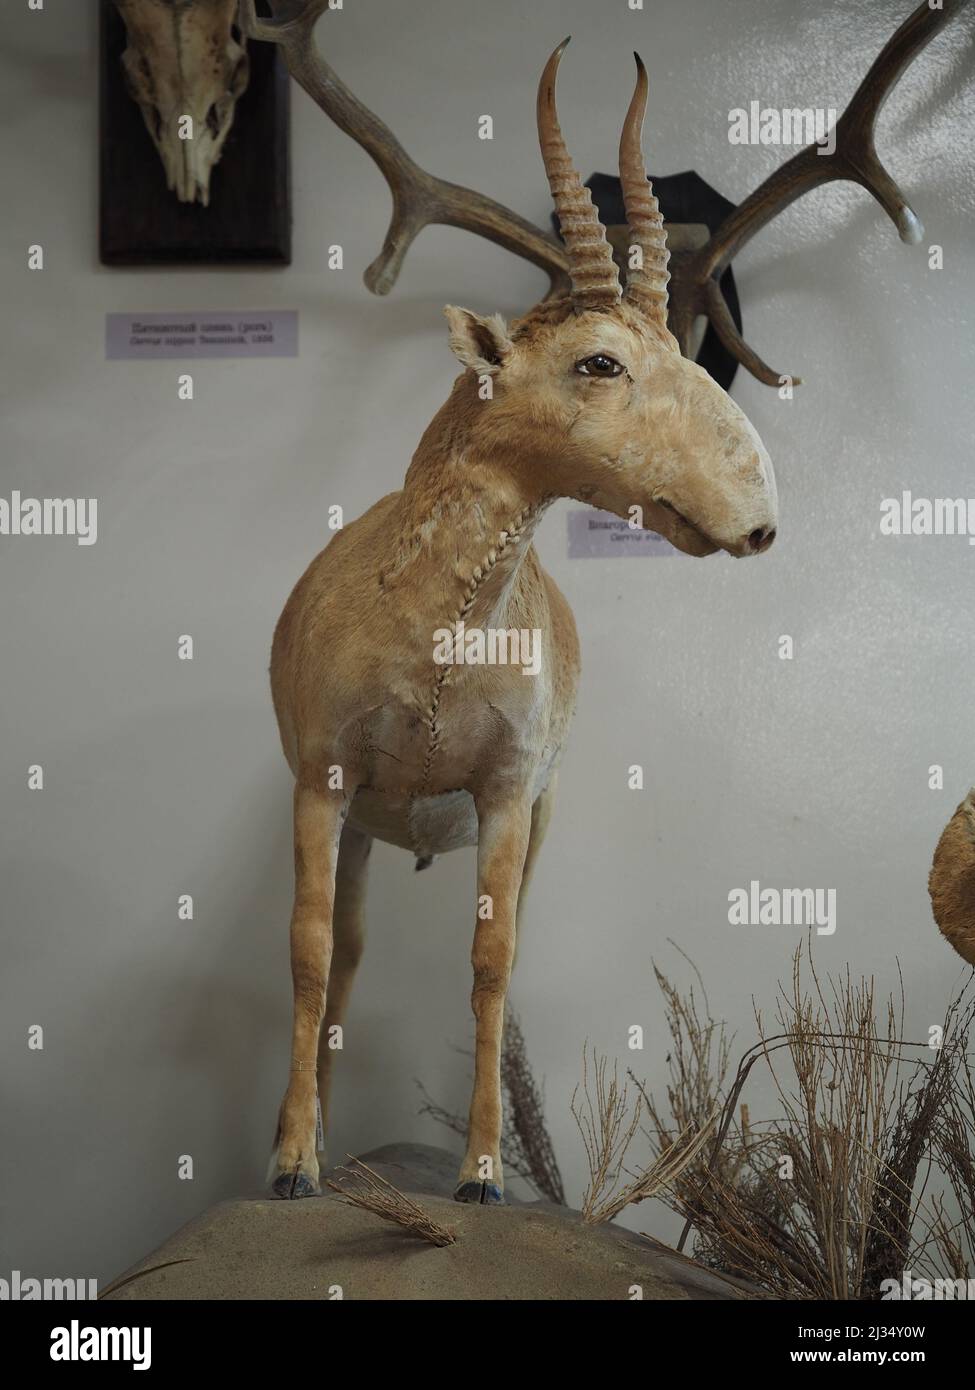 European roe deer with horns. Artiodactyl animal of the deer family. Exhibit of the Zoological Museum. Stock Photo